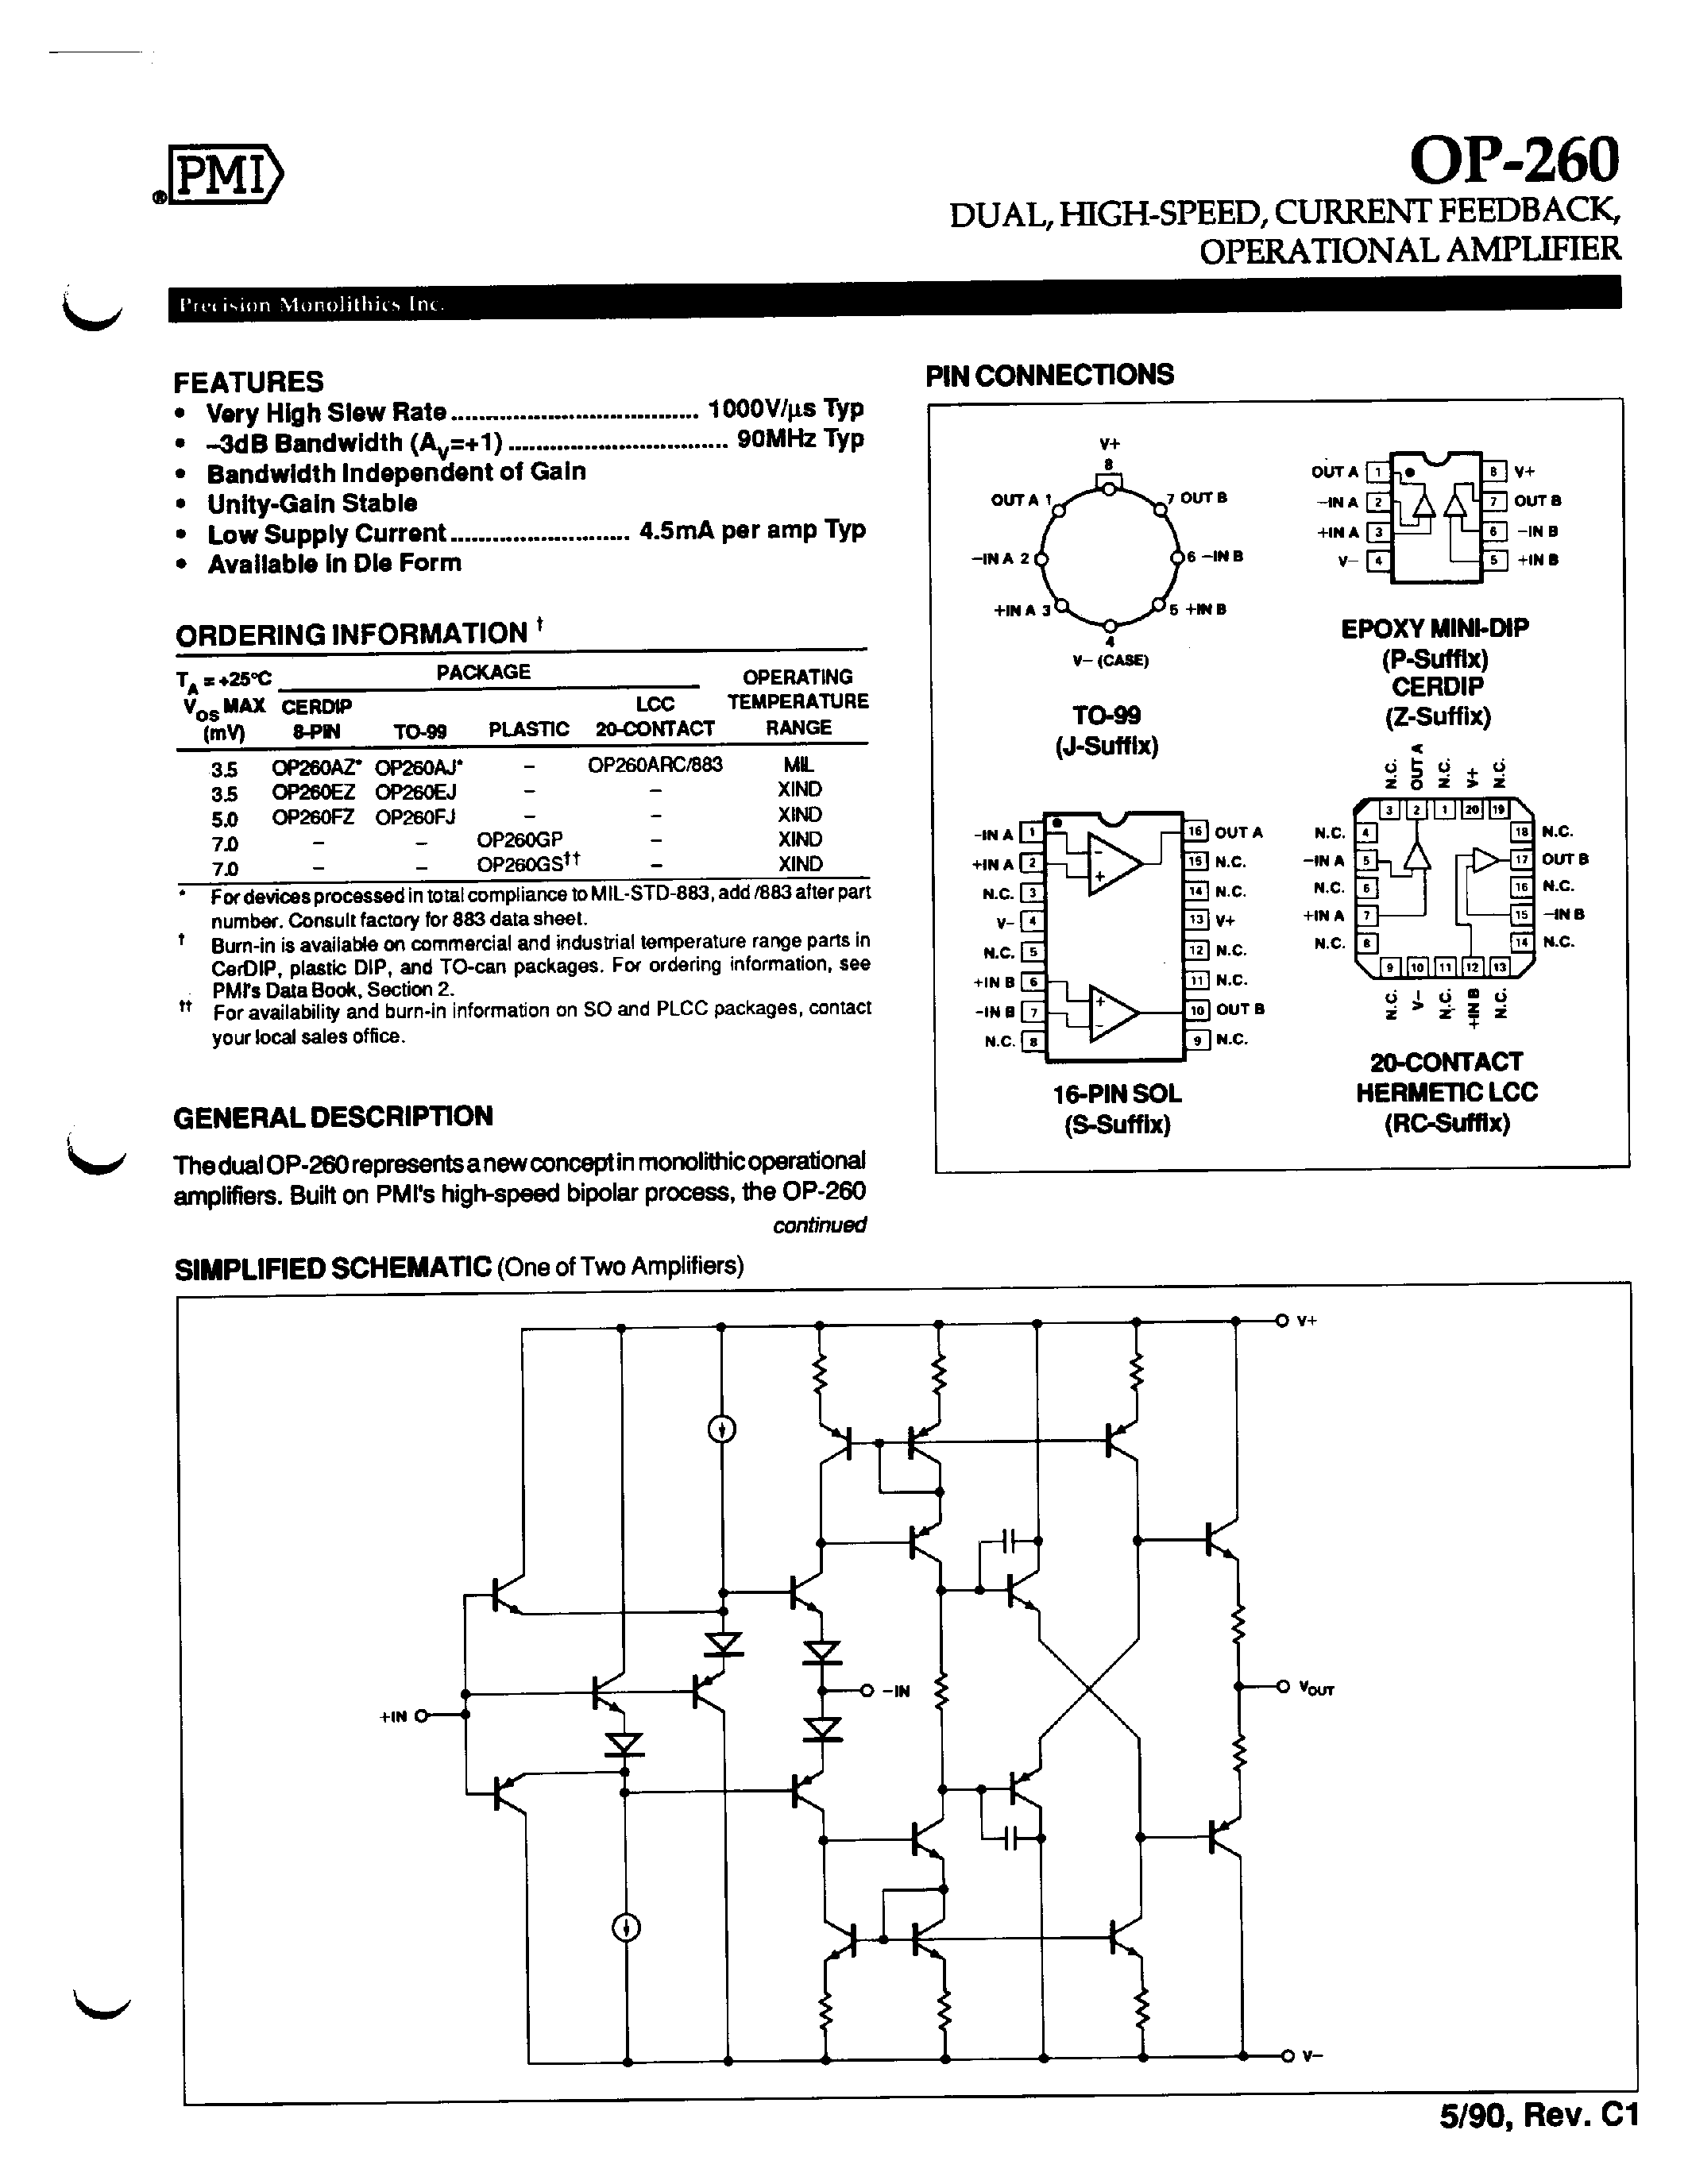 Datasheet OP260 - DUAL / HIGH-SPEED / CURRENT FEEDBACK / OPERATIONAL AMPLIFIER page 1